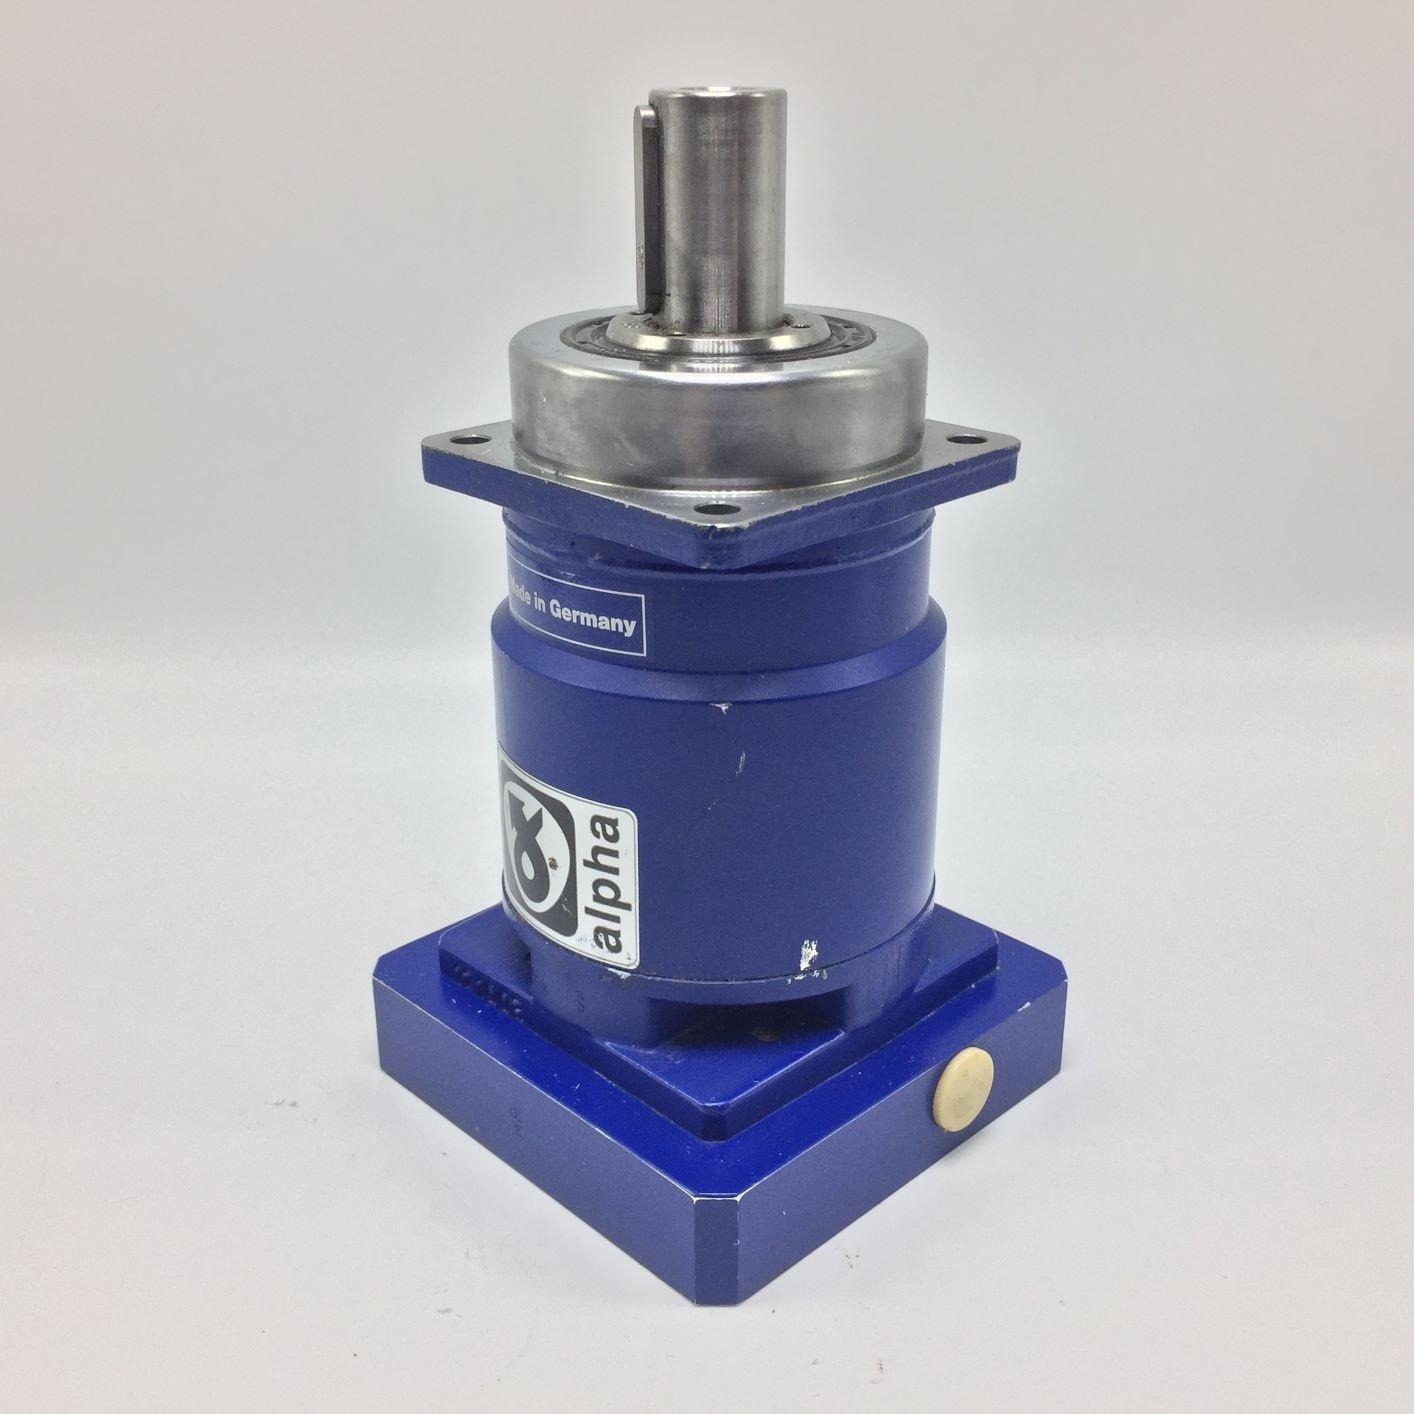 ALPHA WITTENSTEIN SP-075-MF2 PLANETARY GEARBOX TESTED 